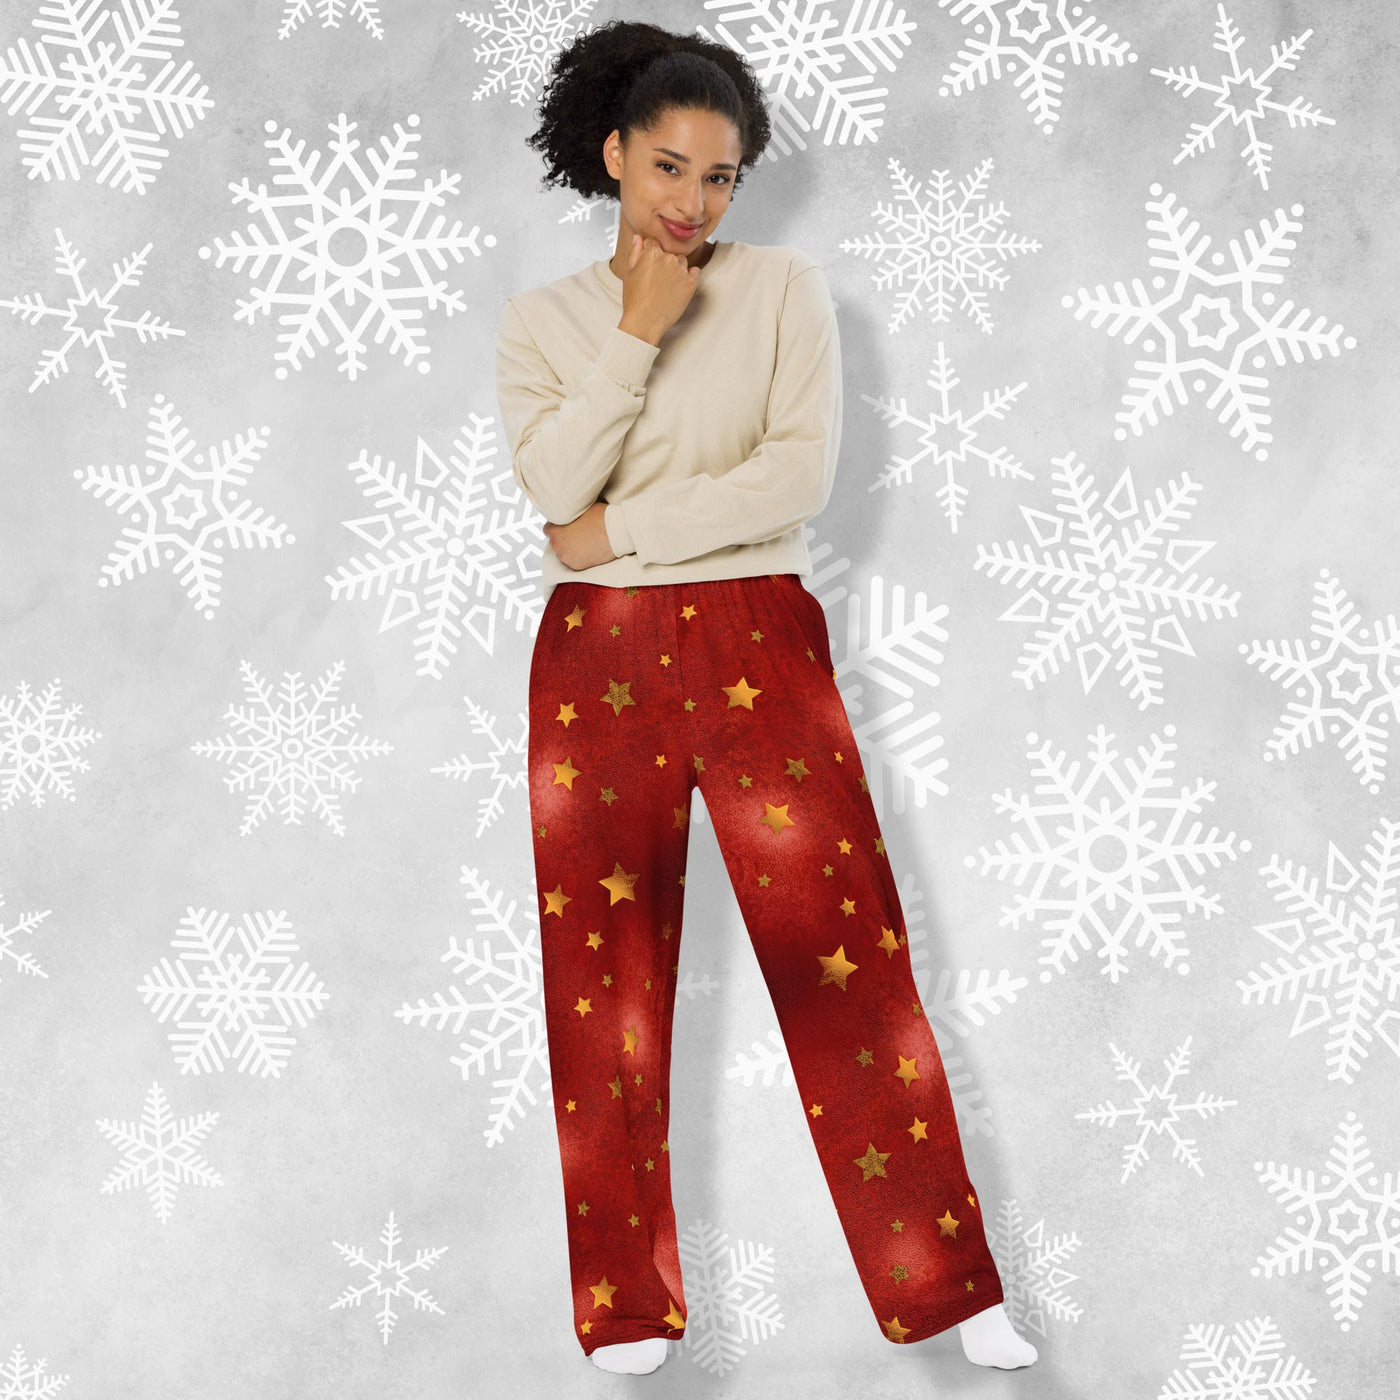 Stars on Red - Wide leg Lounge Pants